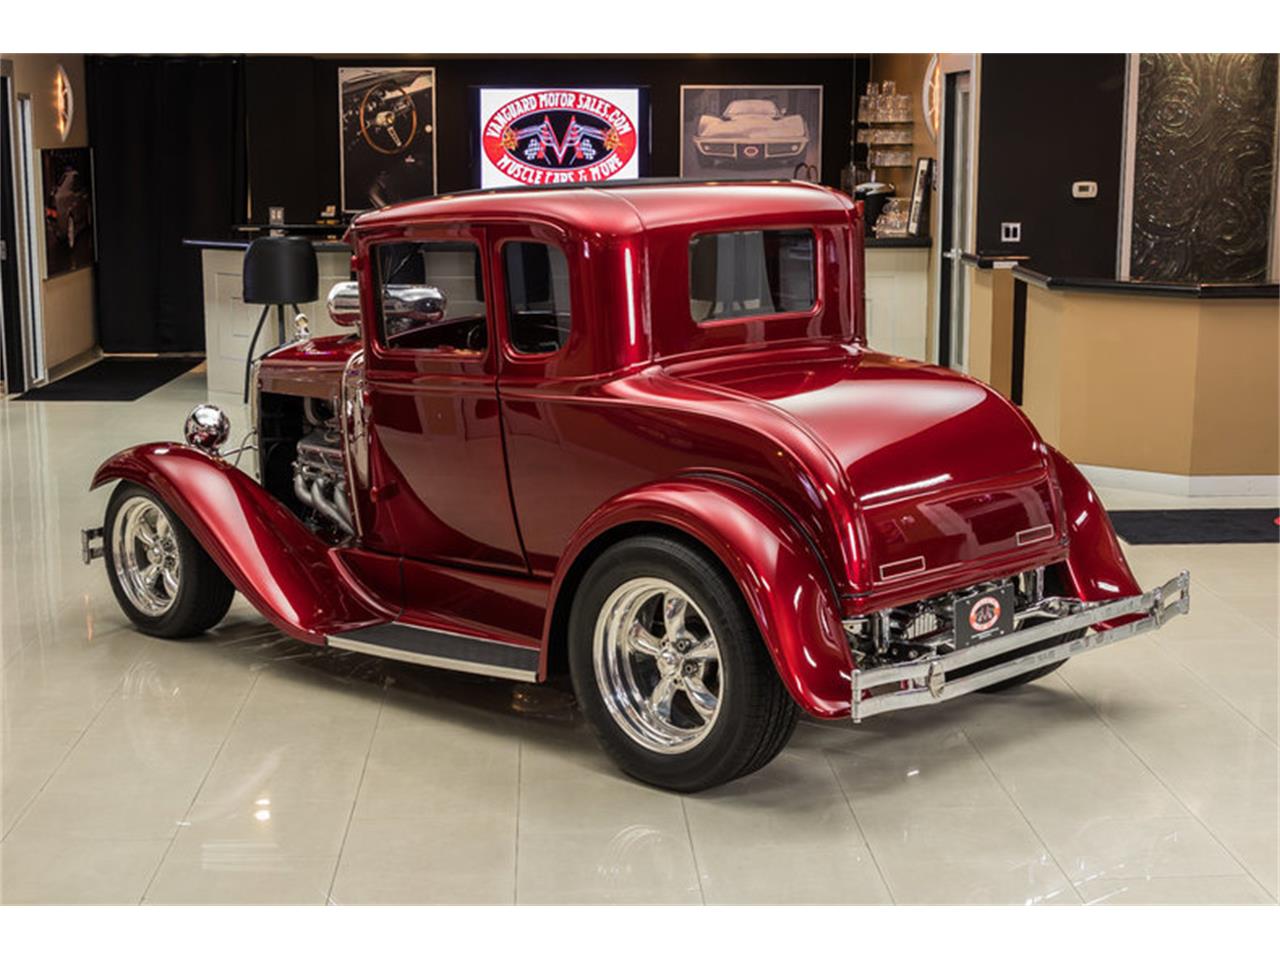 Ford Model A Door Coupe Hot Rod For Sale Photos | Hot Sex Picture